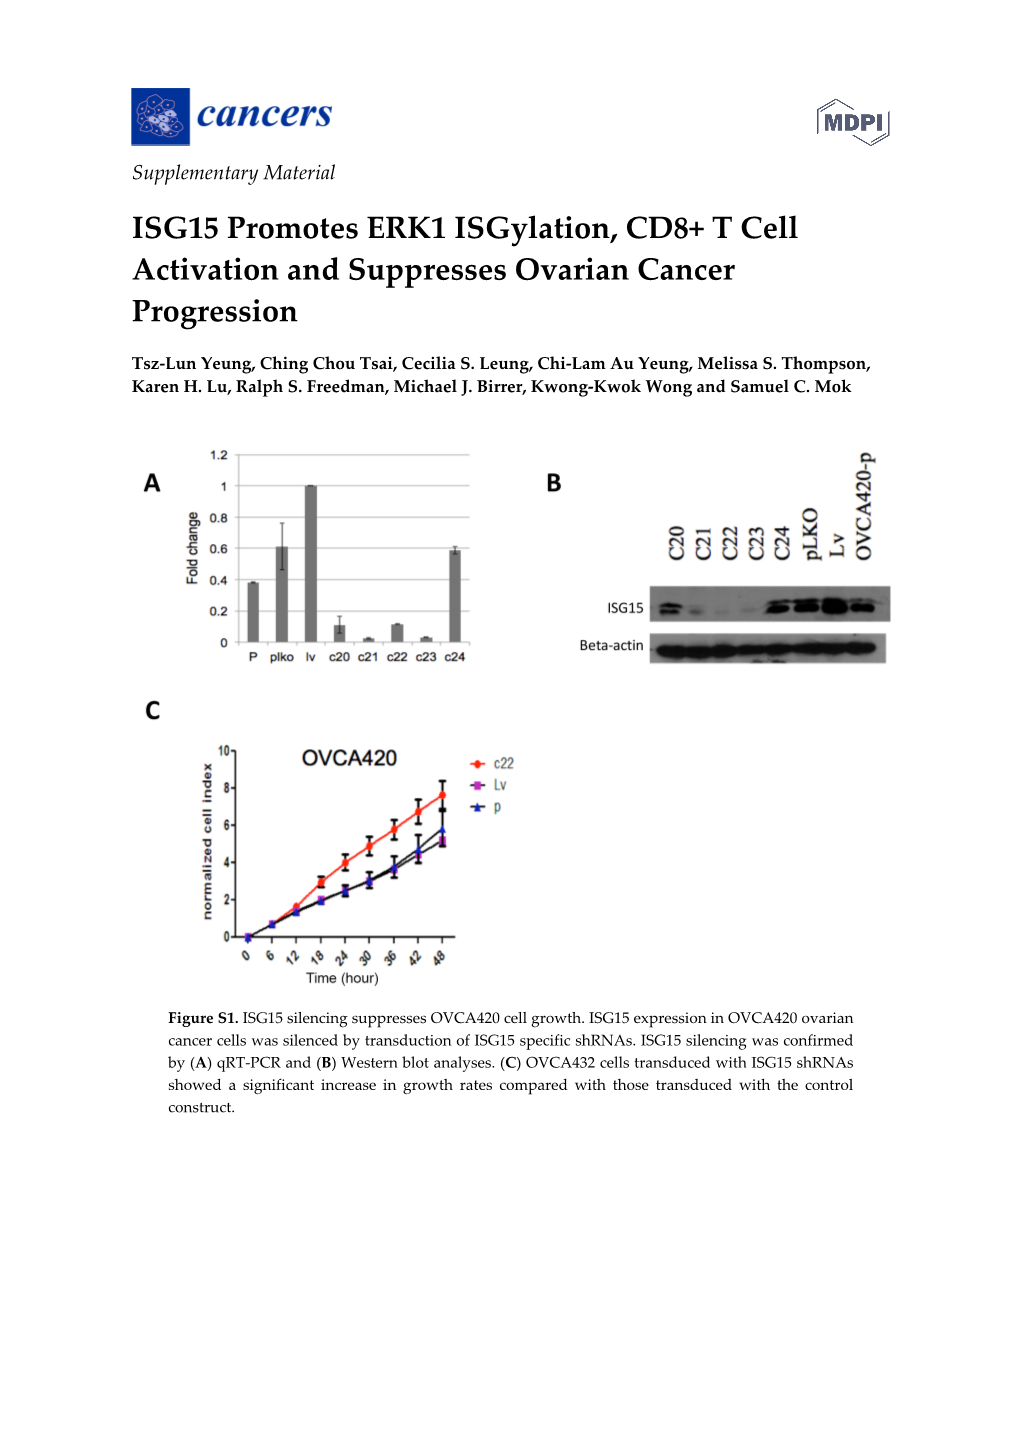 ISG15 Promotes ERK1 Isgylation, CD8+ T Cell Activation and Suppresses Ovarian Cancer Progression